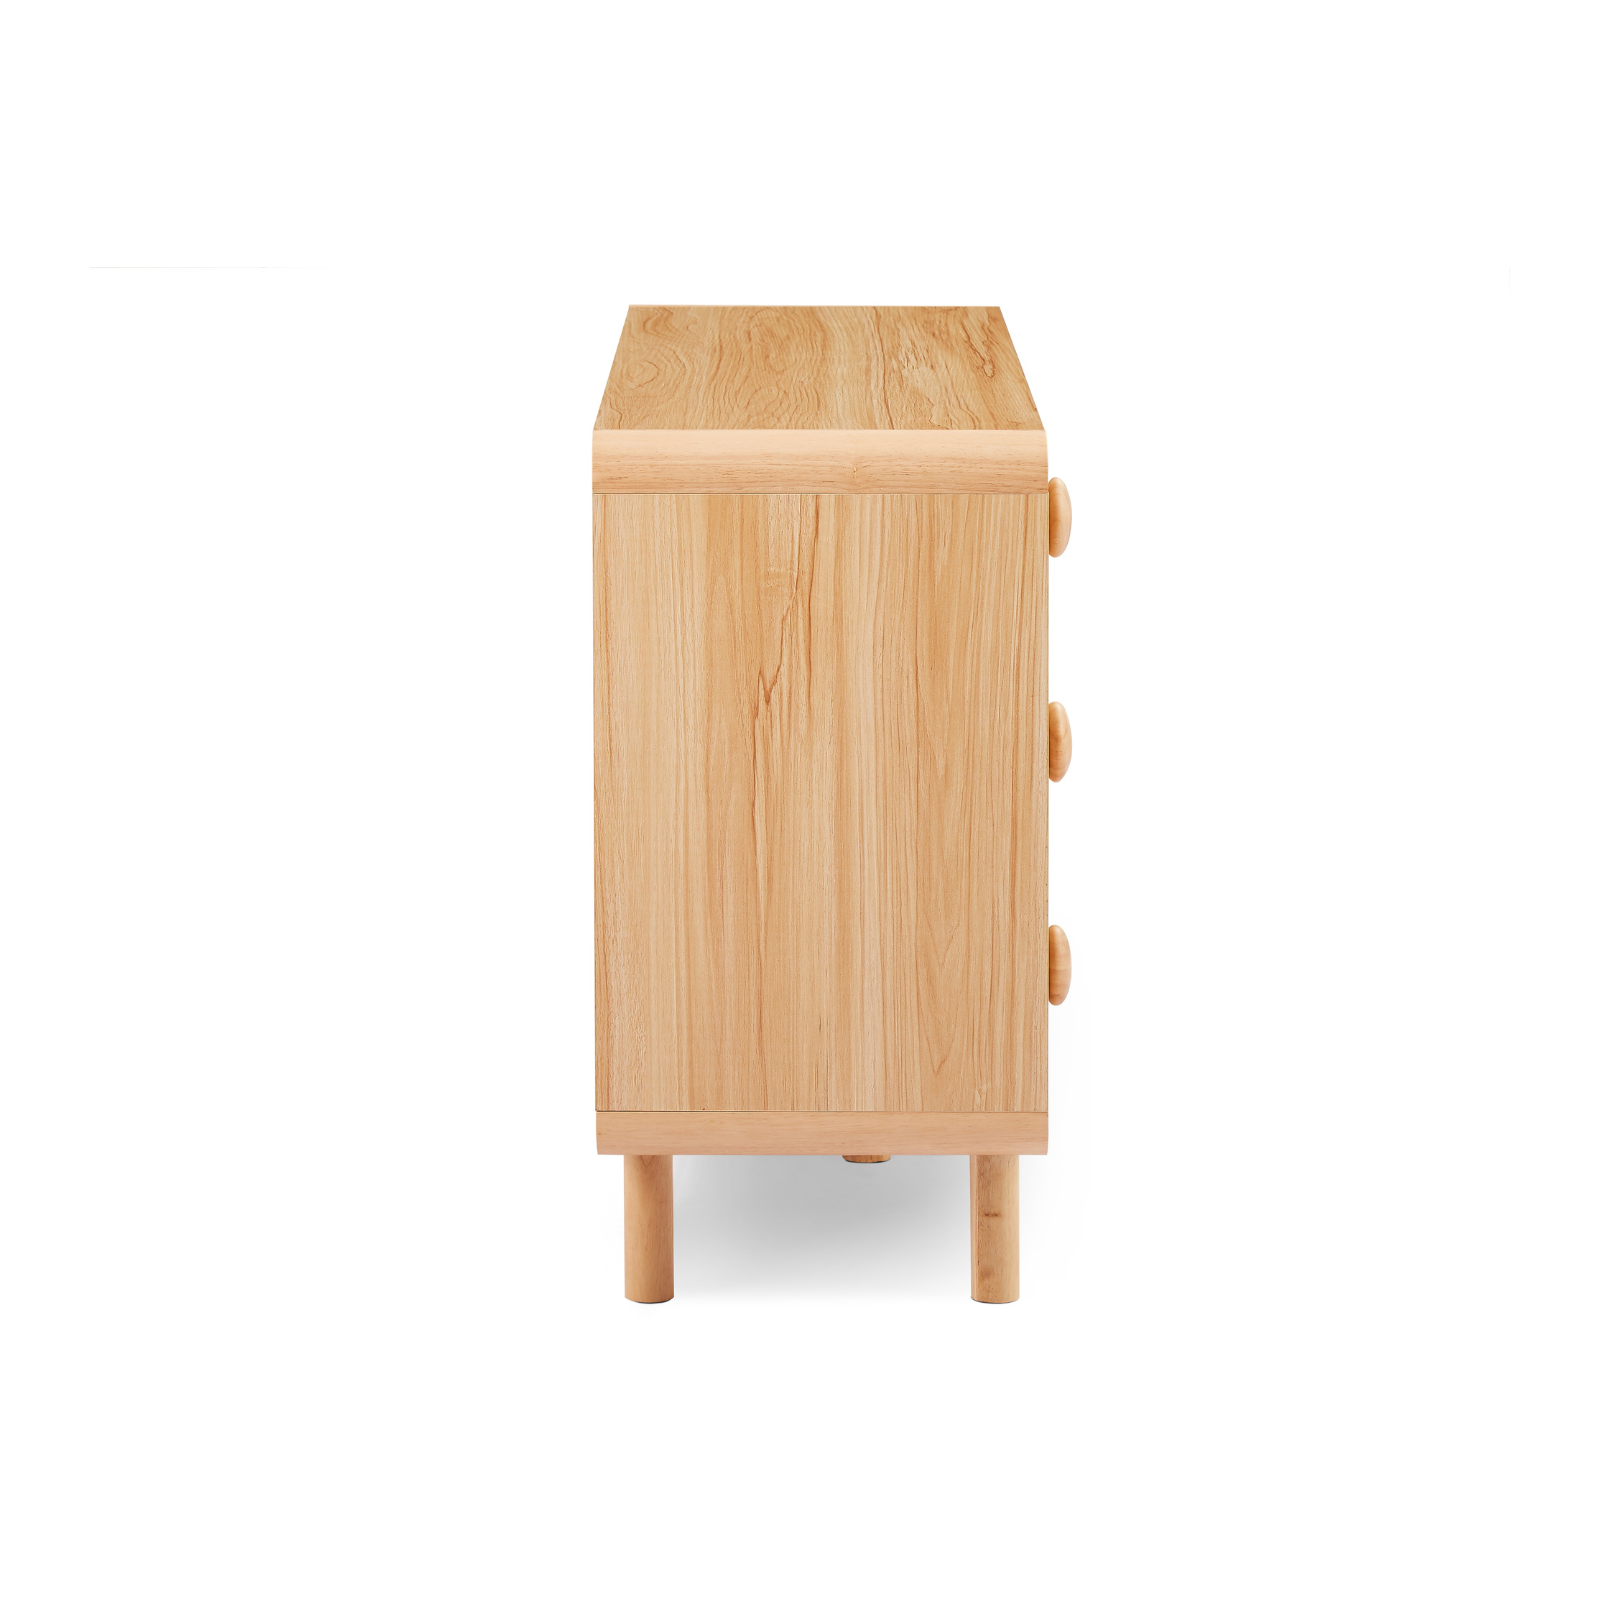 Spencer 6 Chest of Drawers in Natural